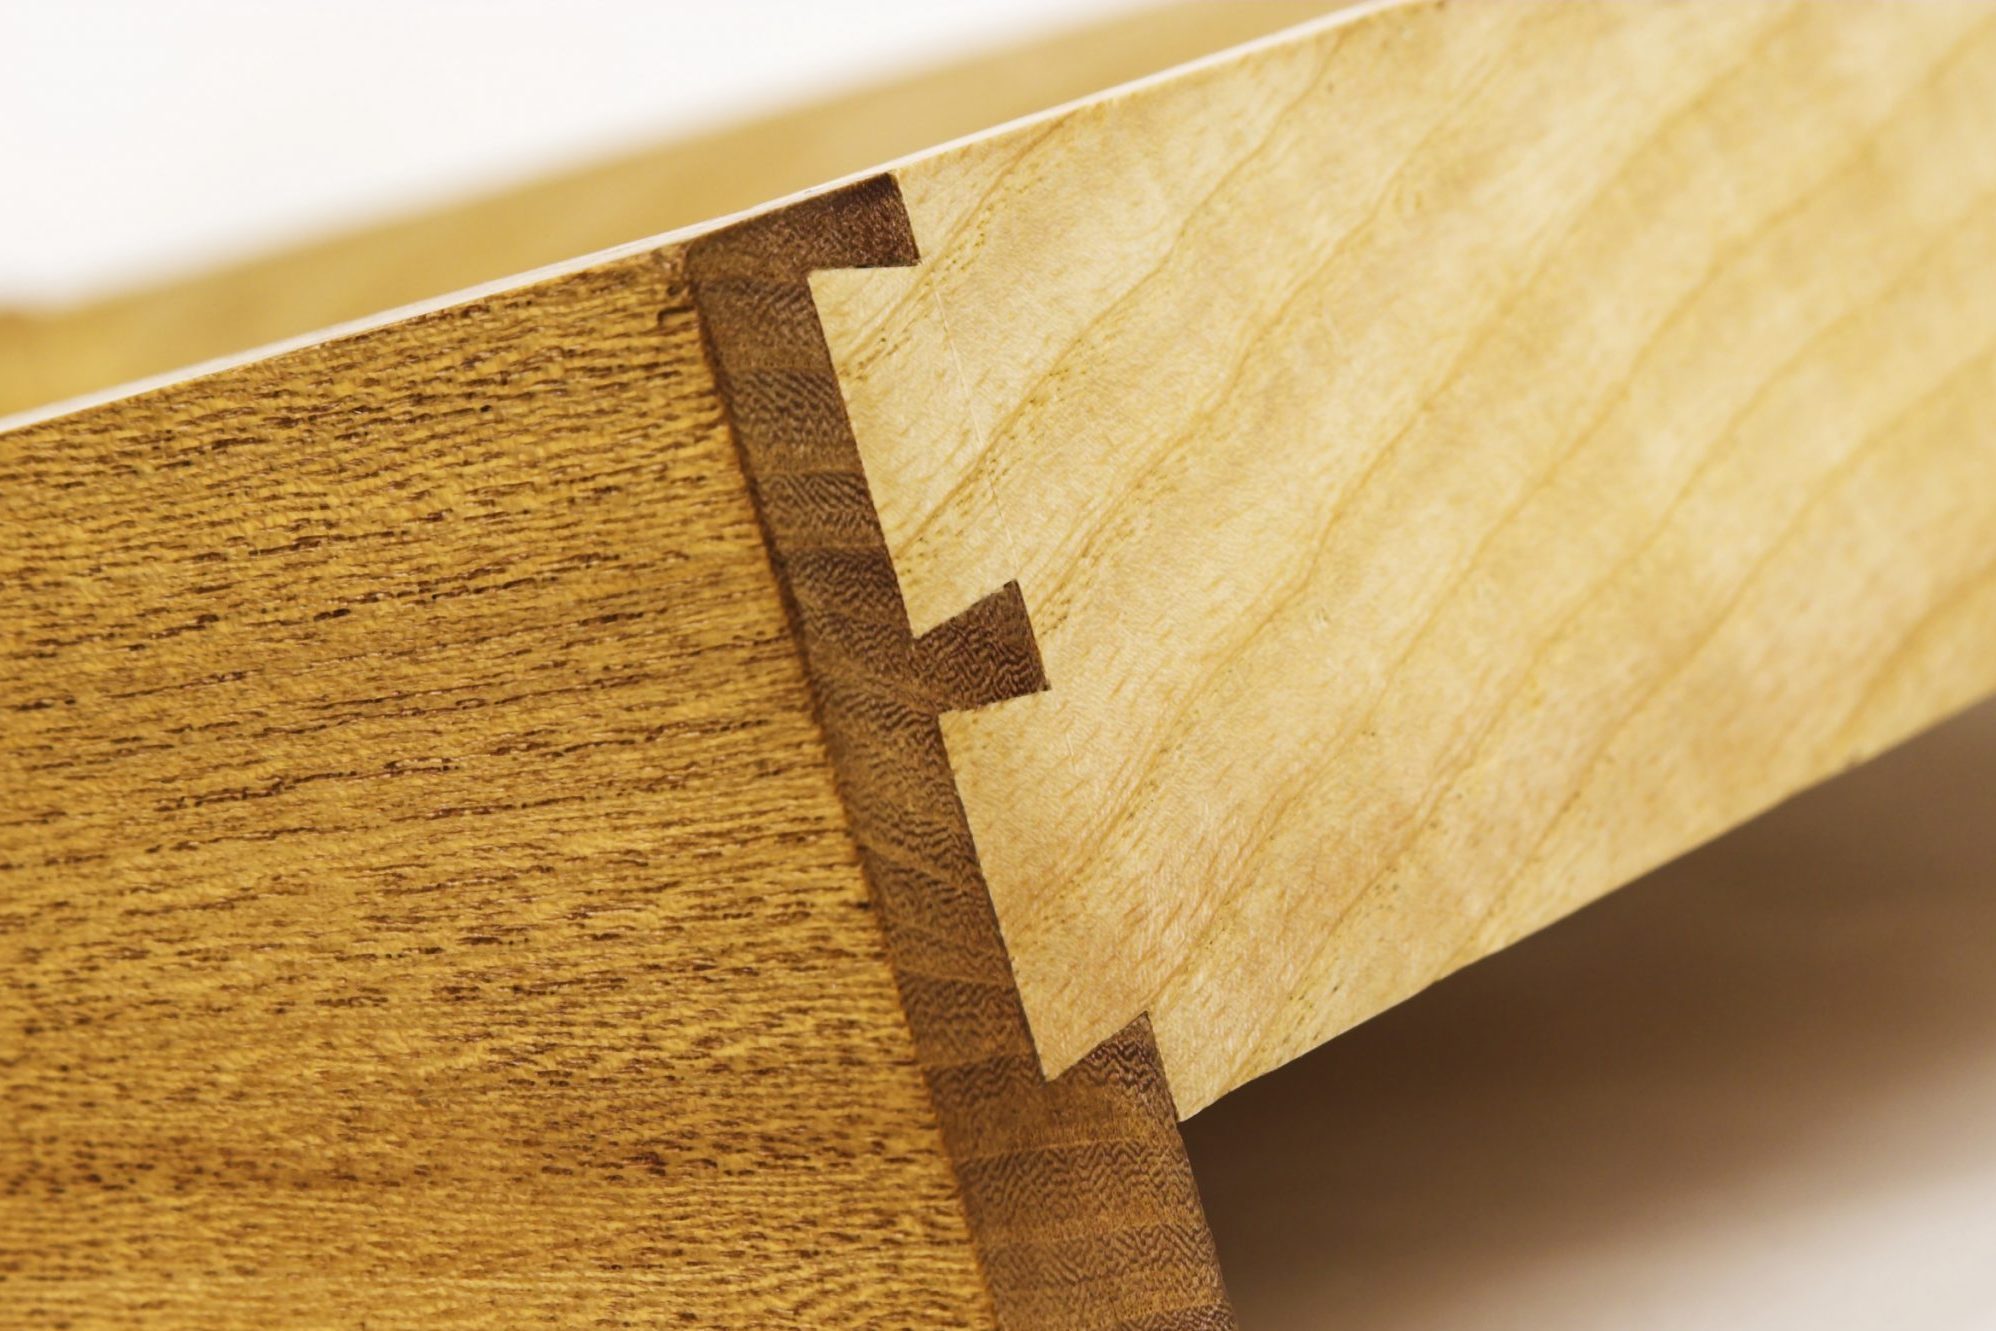 Woodworking dovetail joints